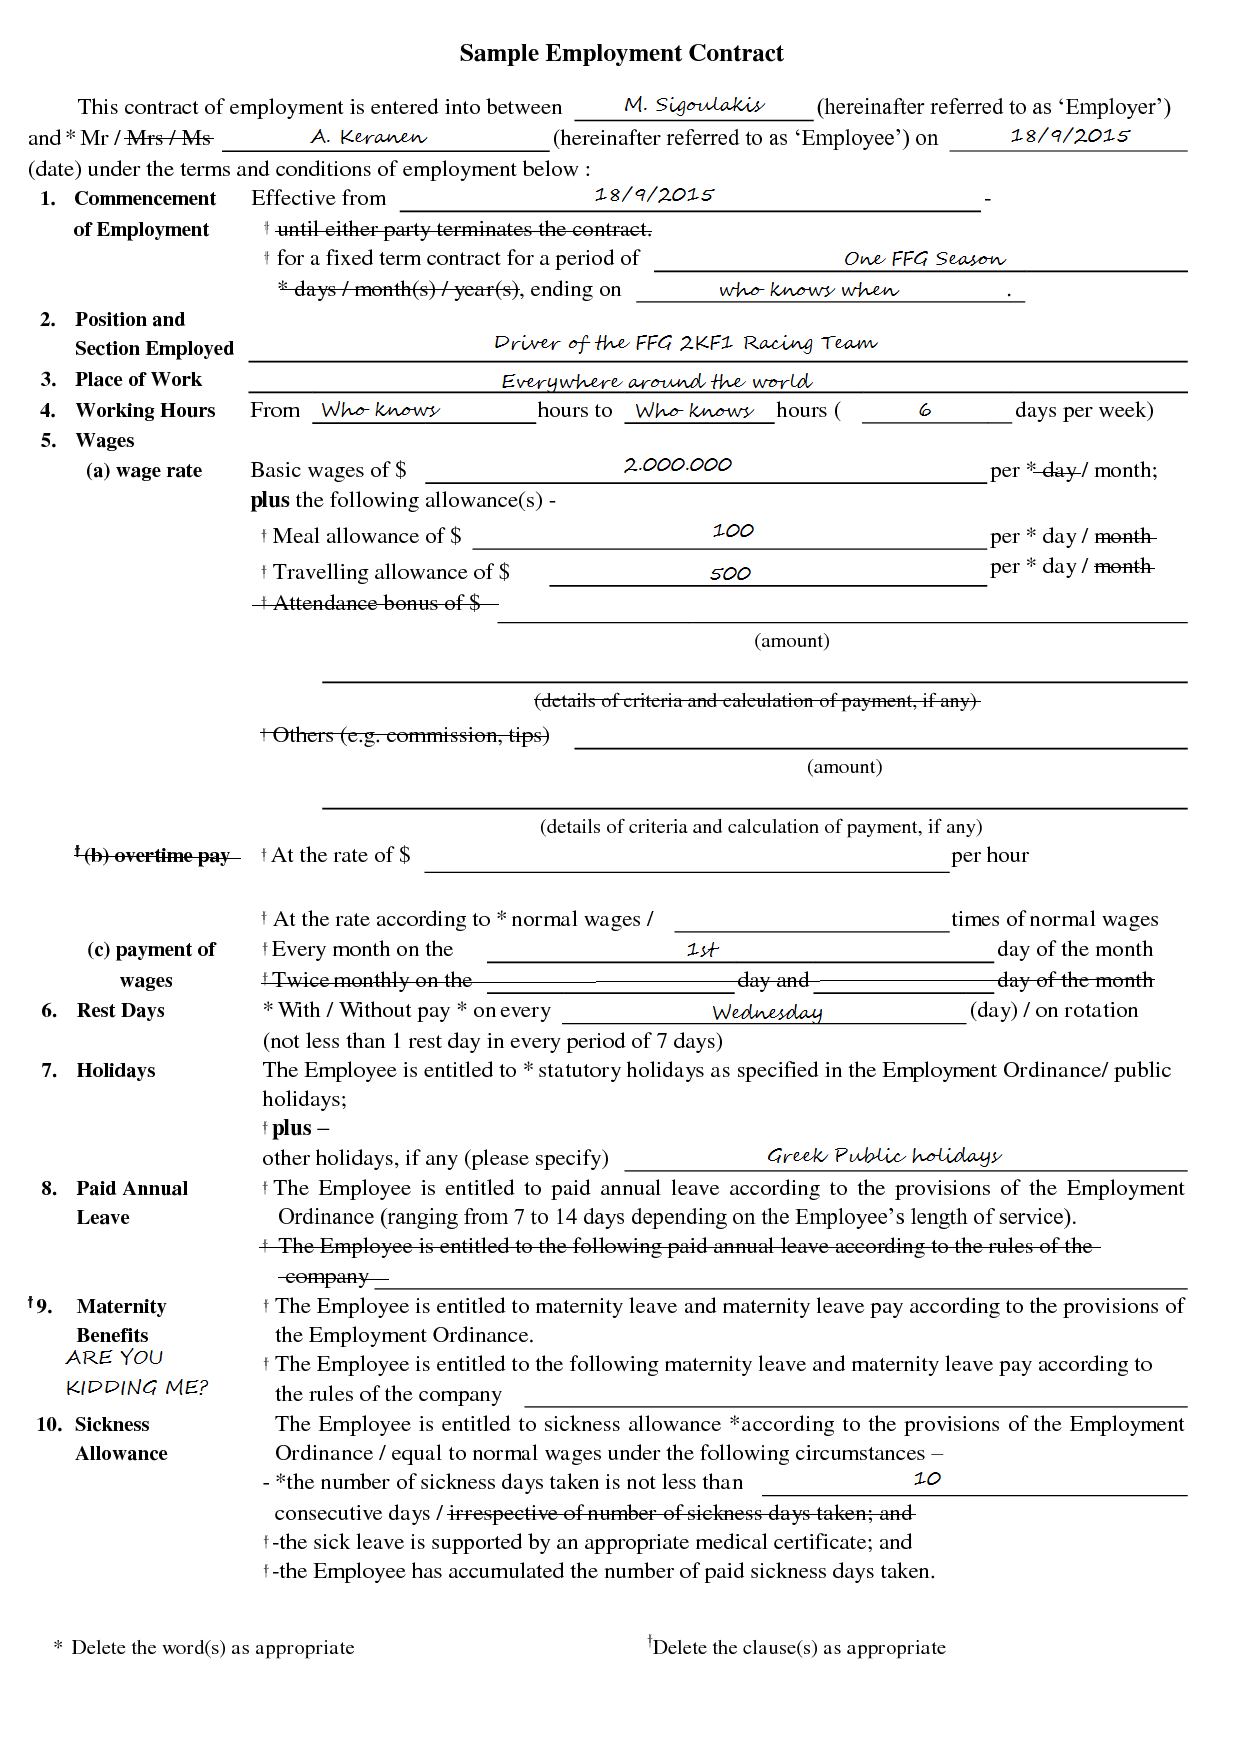 employment-contract-sample-323.png